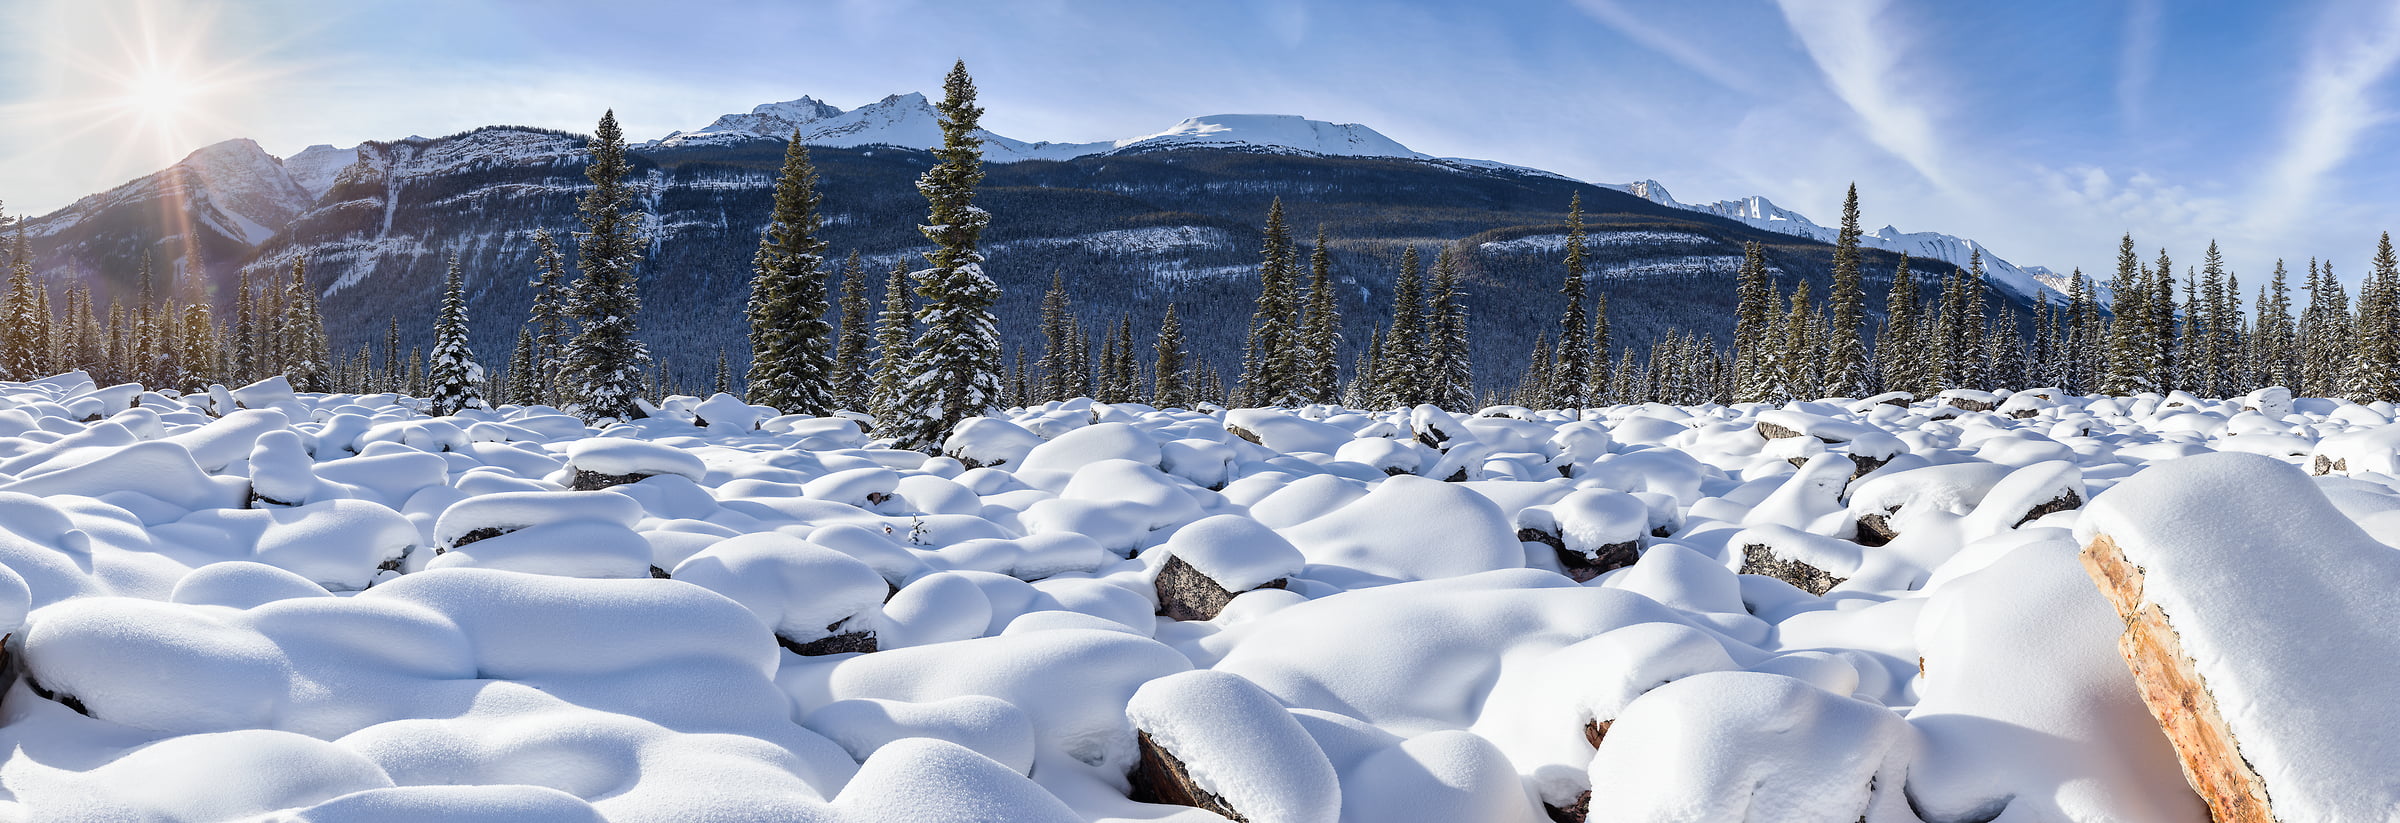 1,694 megapixels! A very high resolution, large-format VAST photo print of a winter landscape scene with snow-covered rocks, evergreen trees, and mountains; landscape photograph created by Scott Dimond in Jasper National Park, Alberta, Canada